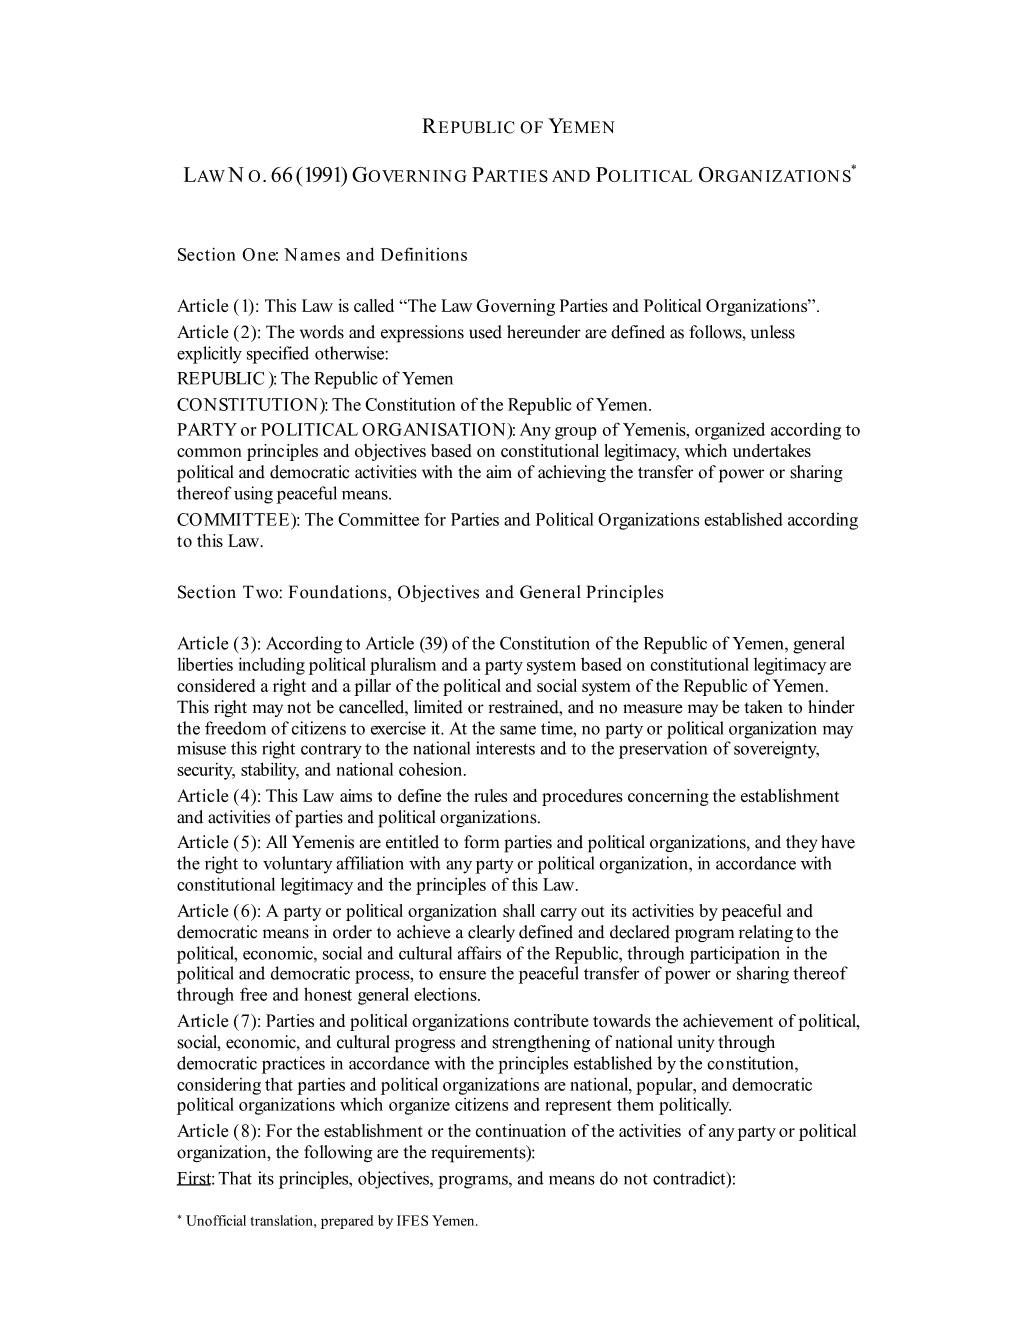 Yemen Parties and Political Organizations Law No. 66 (1991)